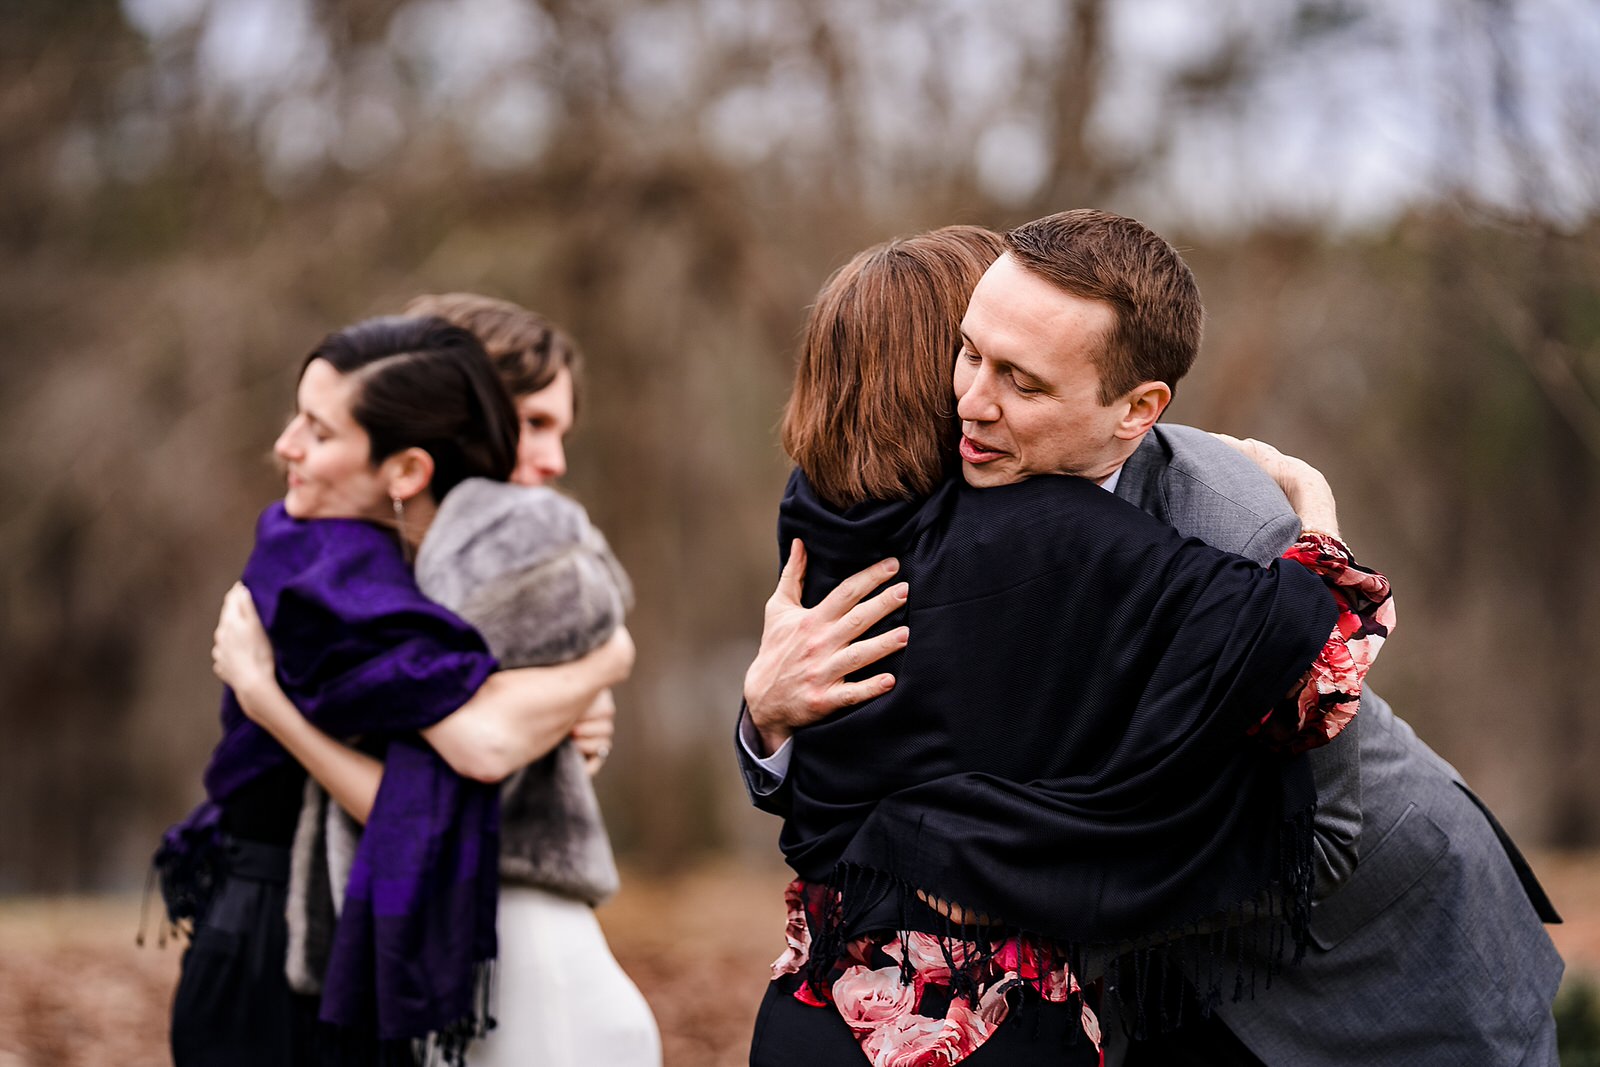 I love all the hugs after a wedding